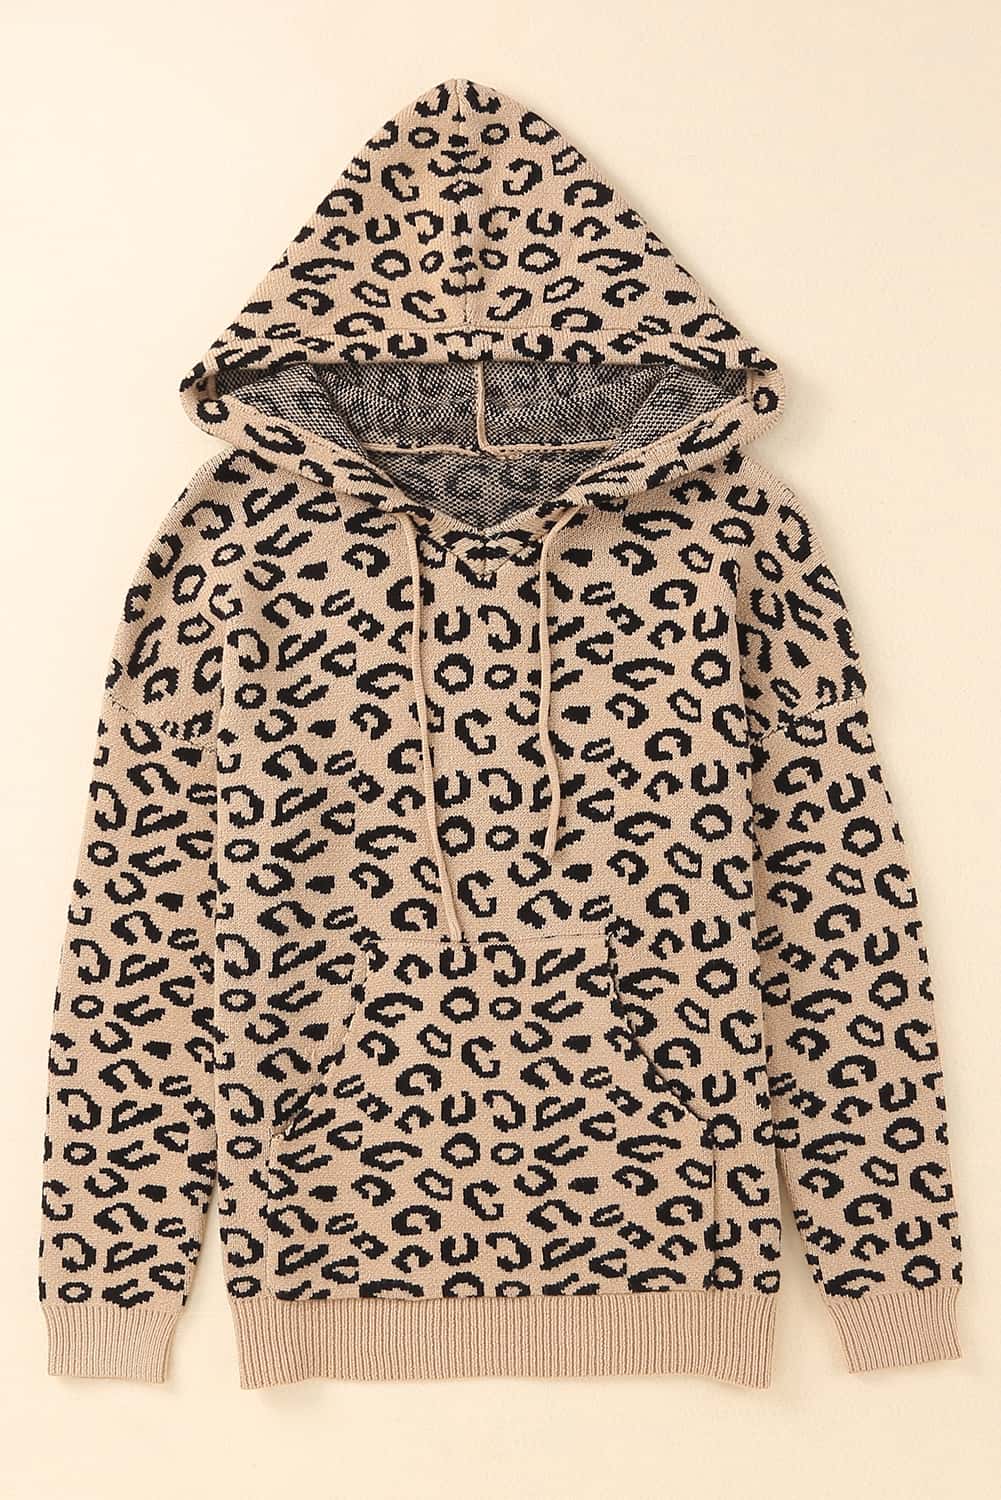 Leopard Print Drawstring Hooded Sweater-Tops / Dresses-[Adult]-[Female]-Leopard-S-Blue Zone Planet